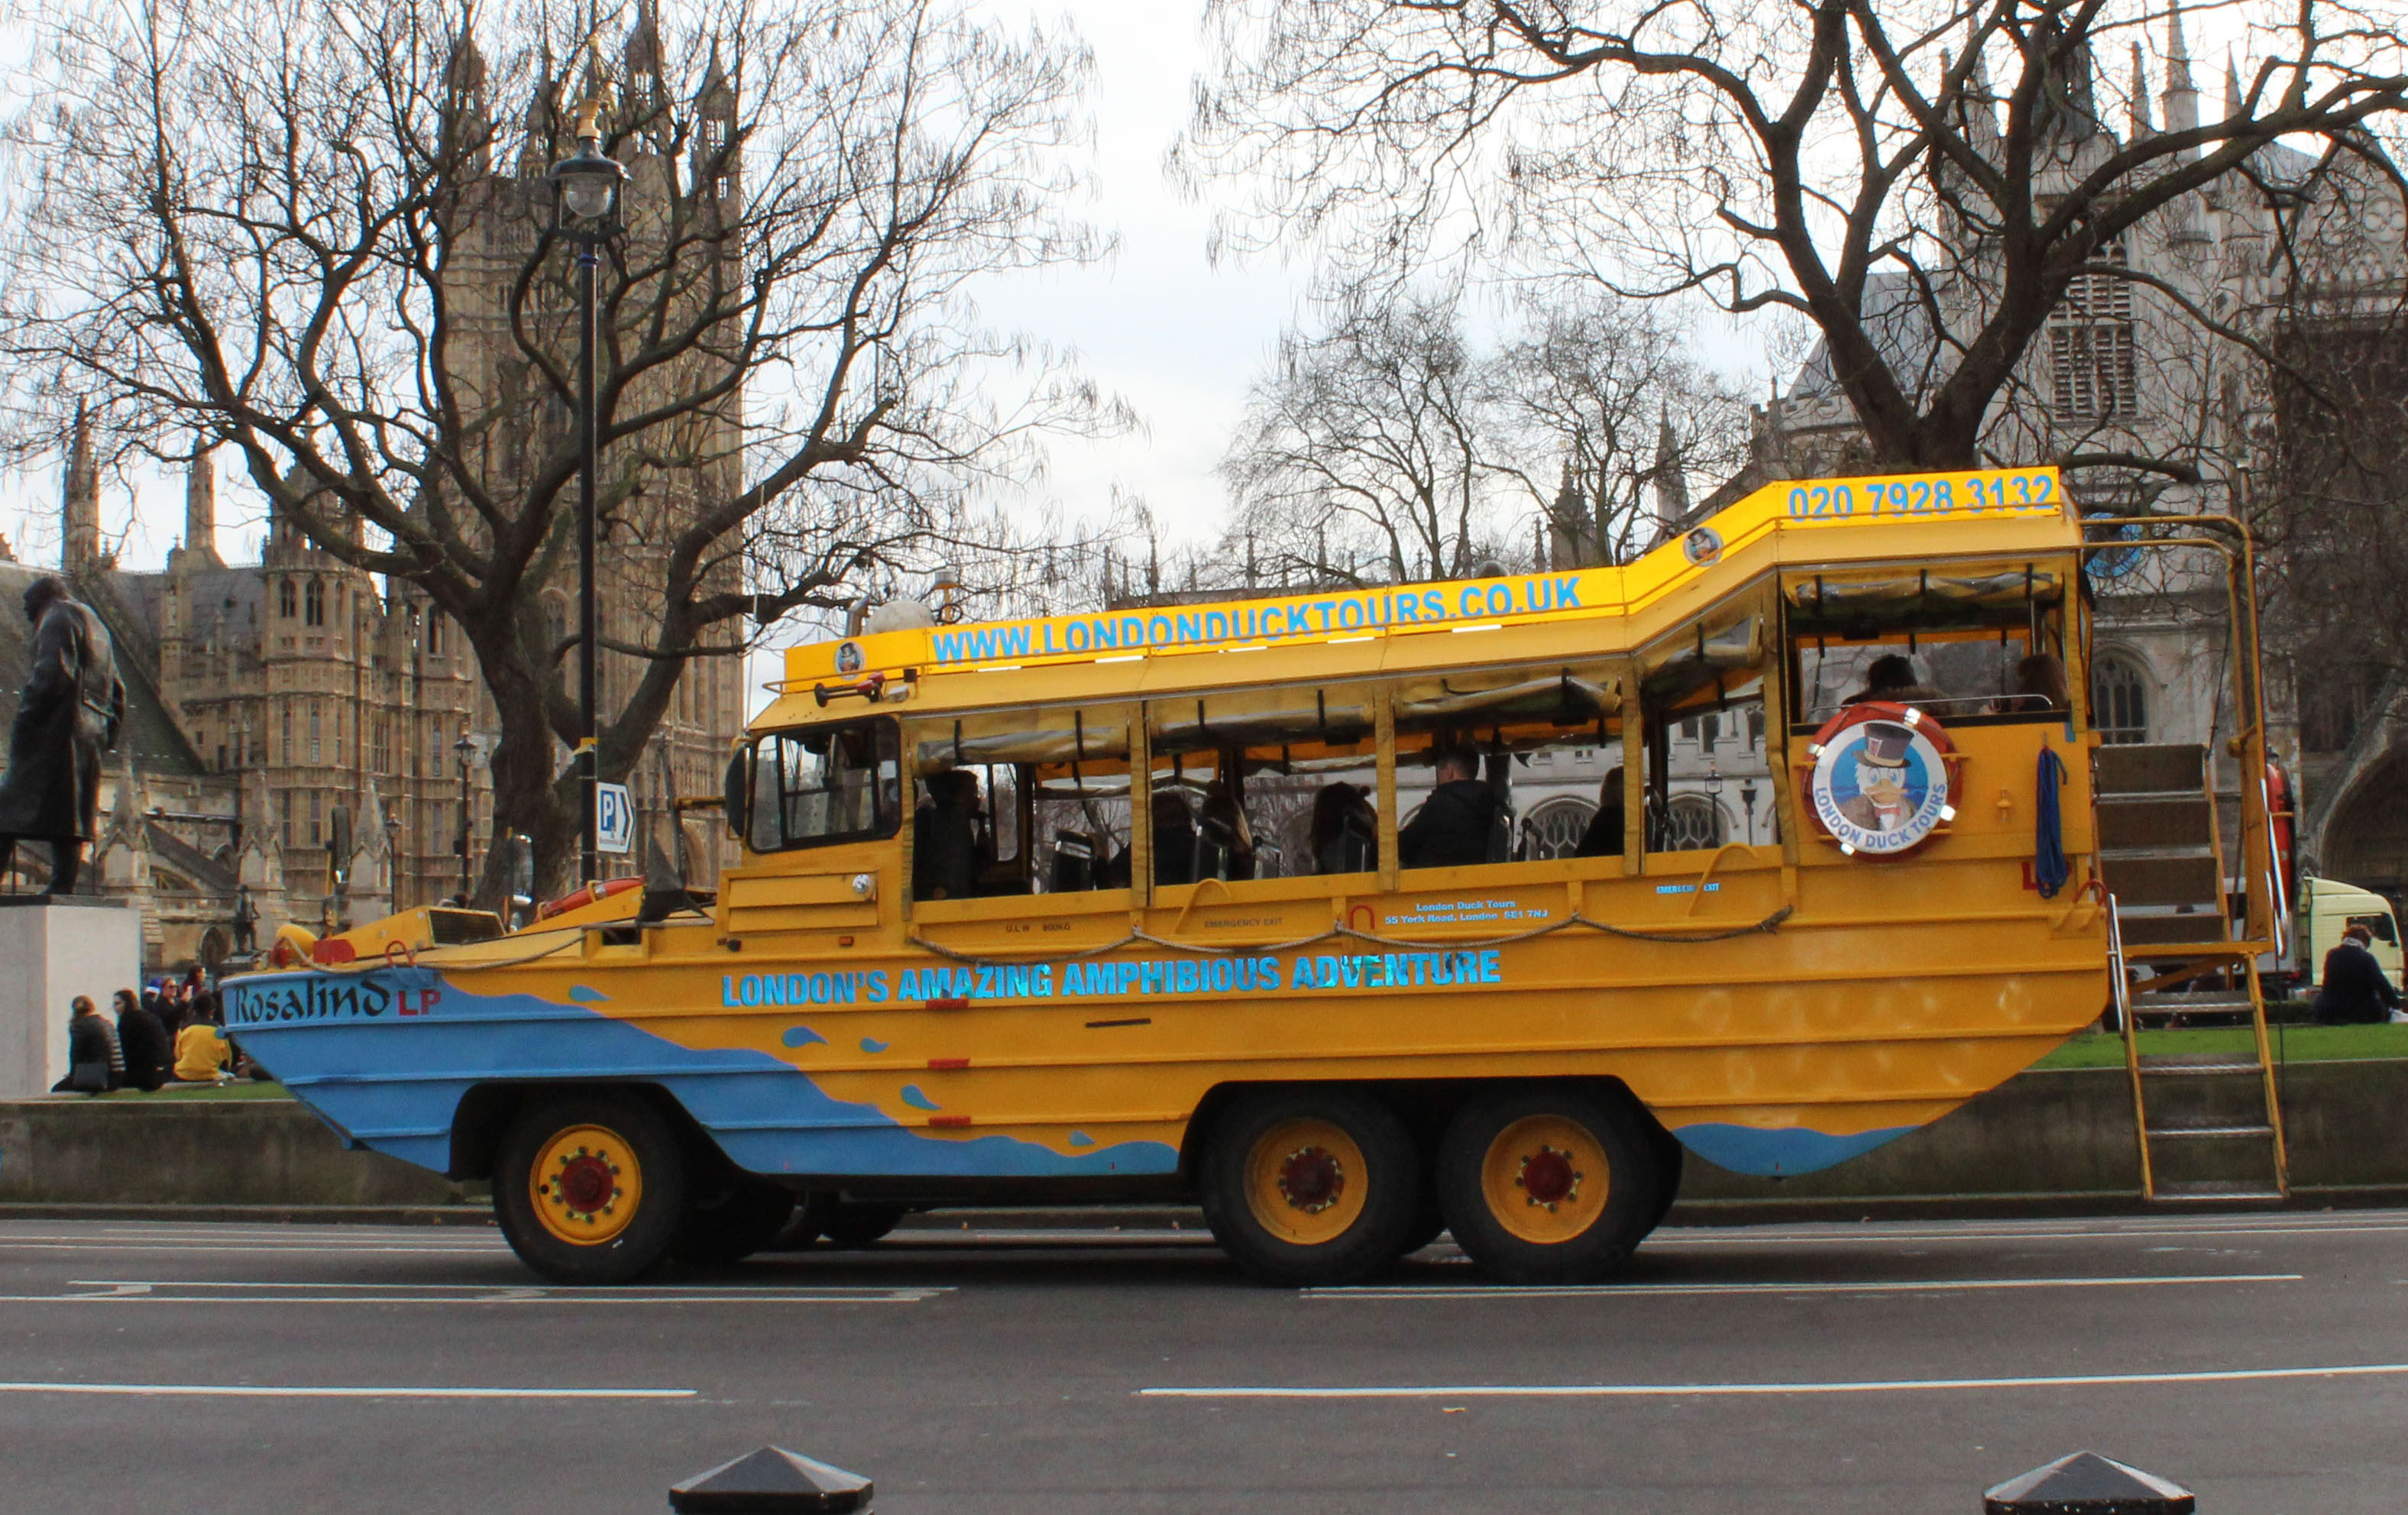 duck tours times